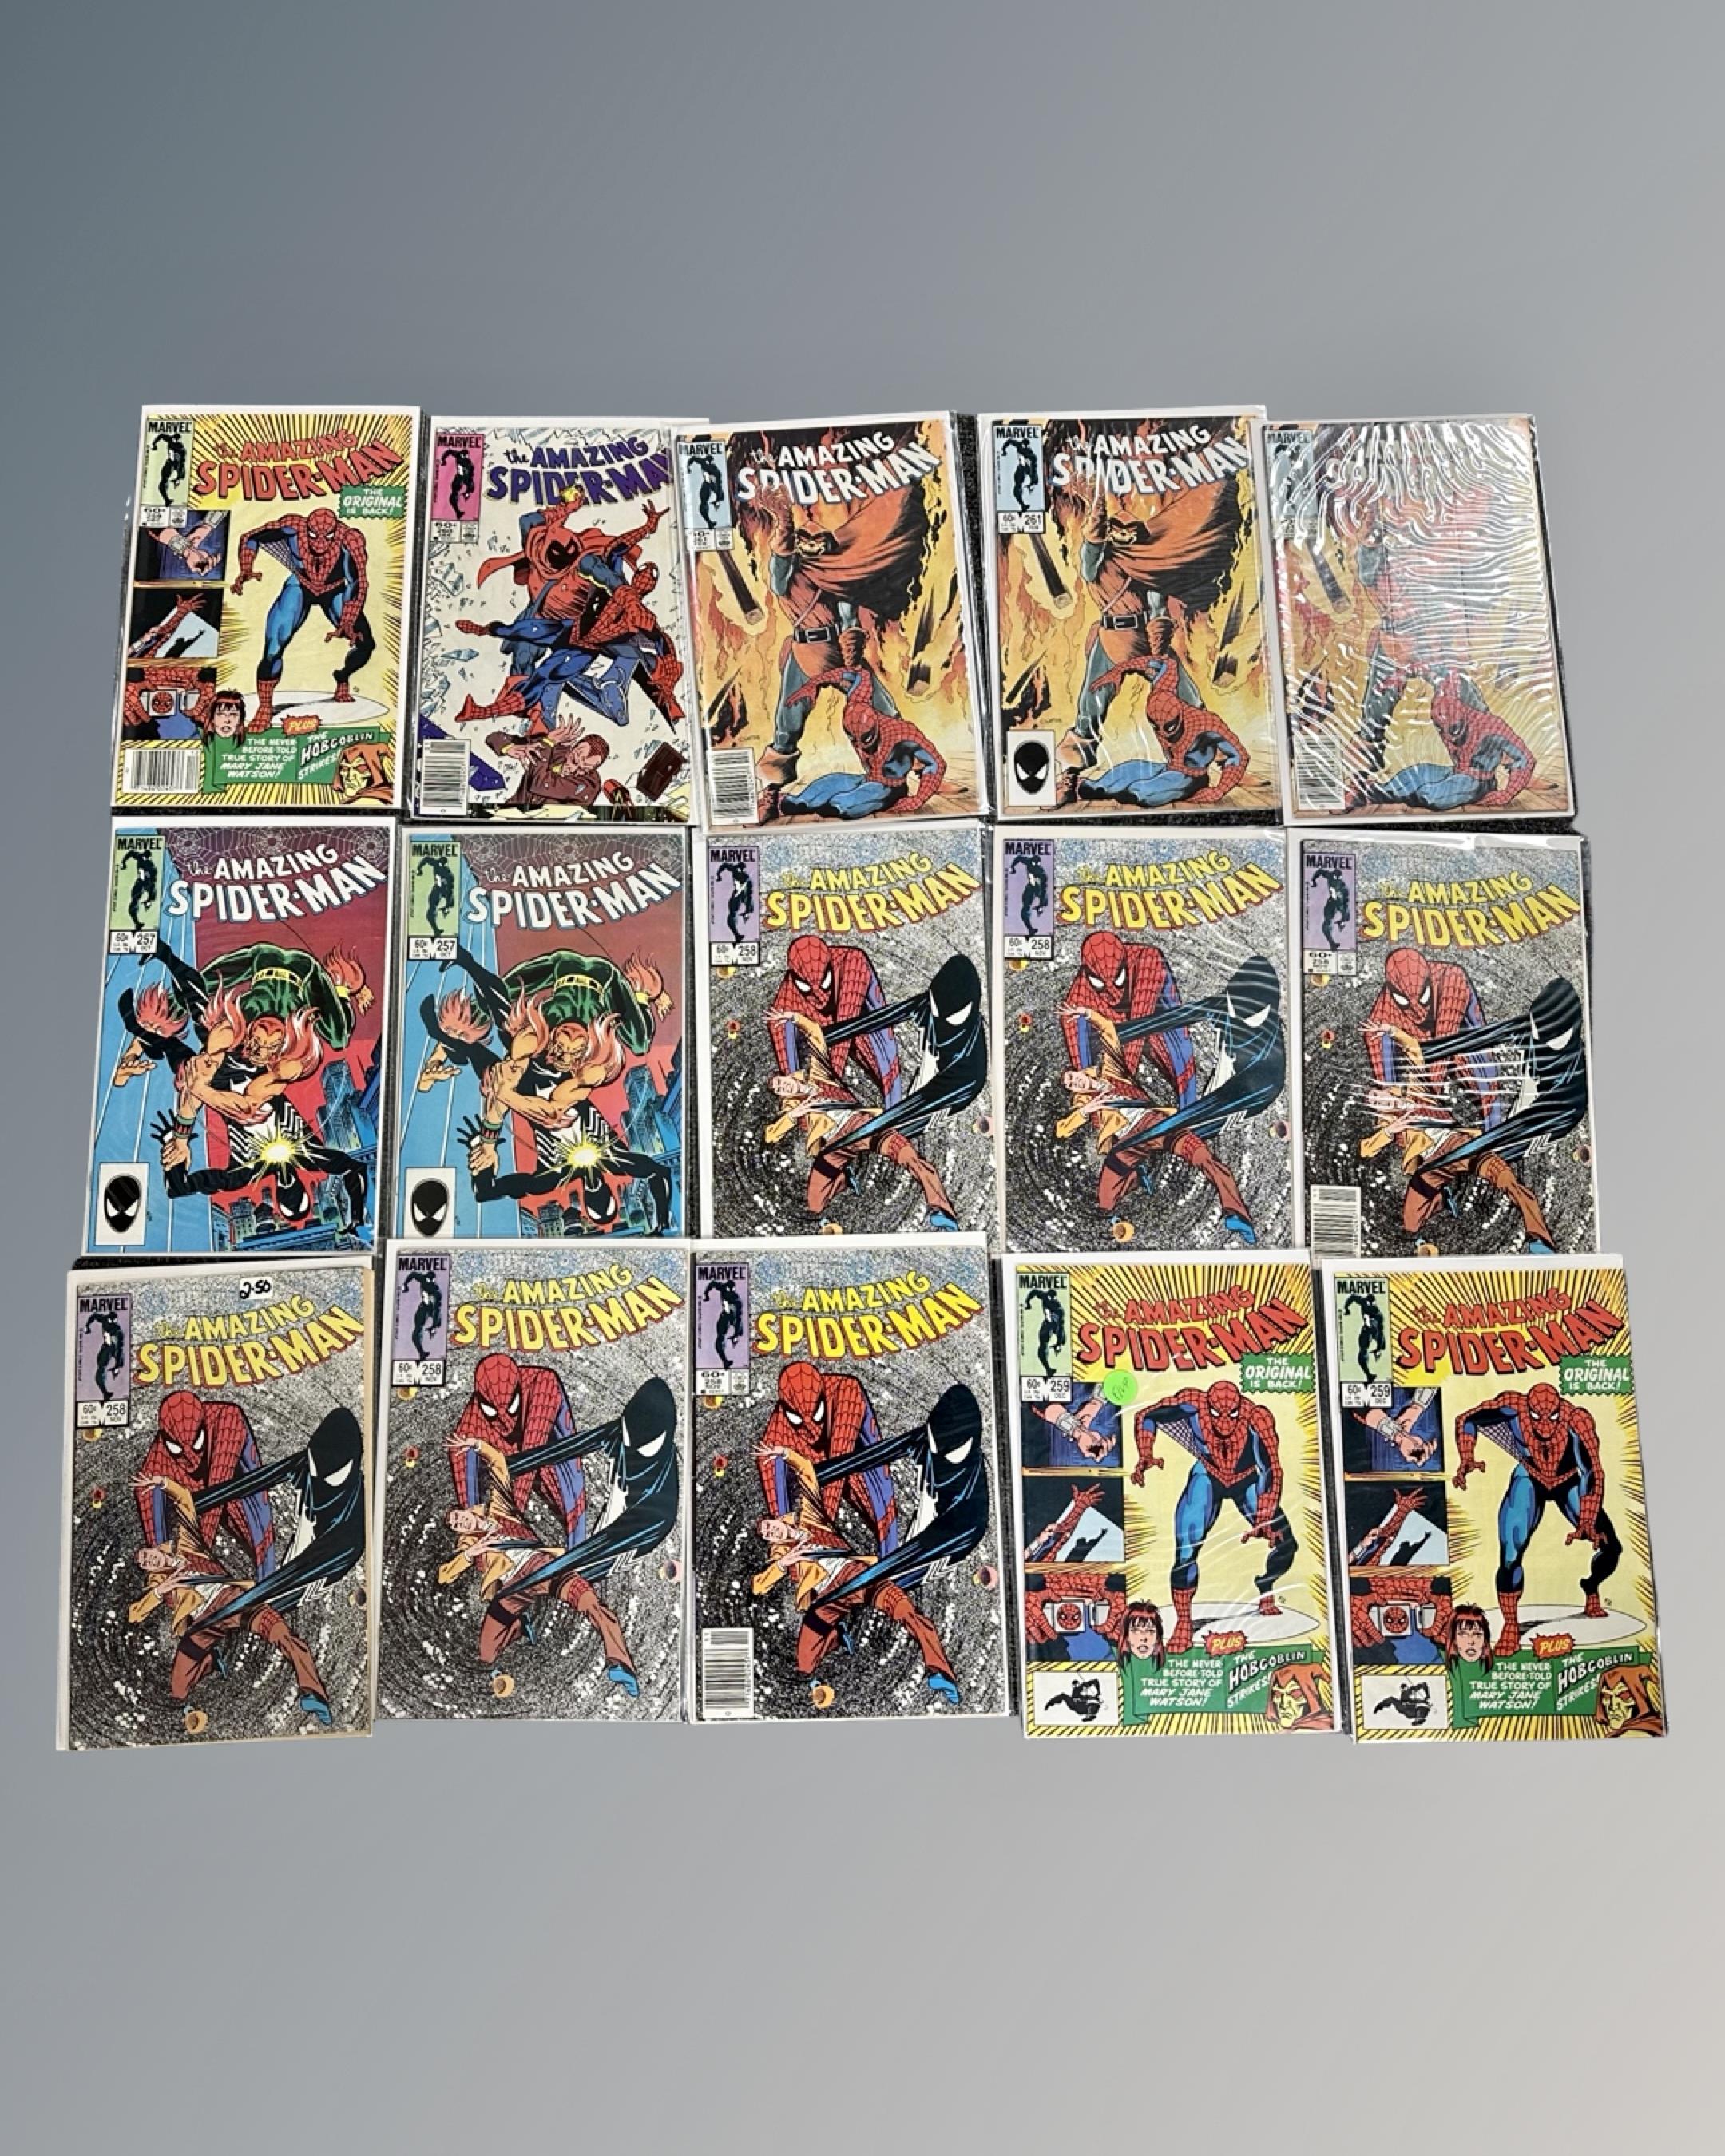 A box containing a large collection of Marvel's The Amazing Spider-Man comics. - Image 6 of 12